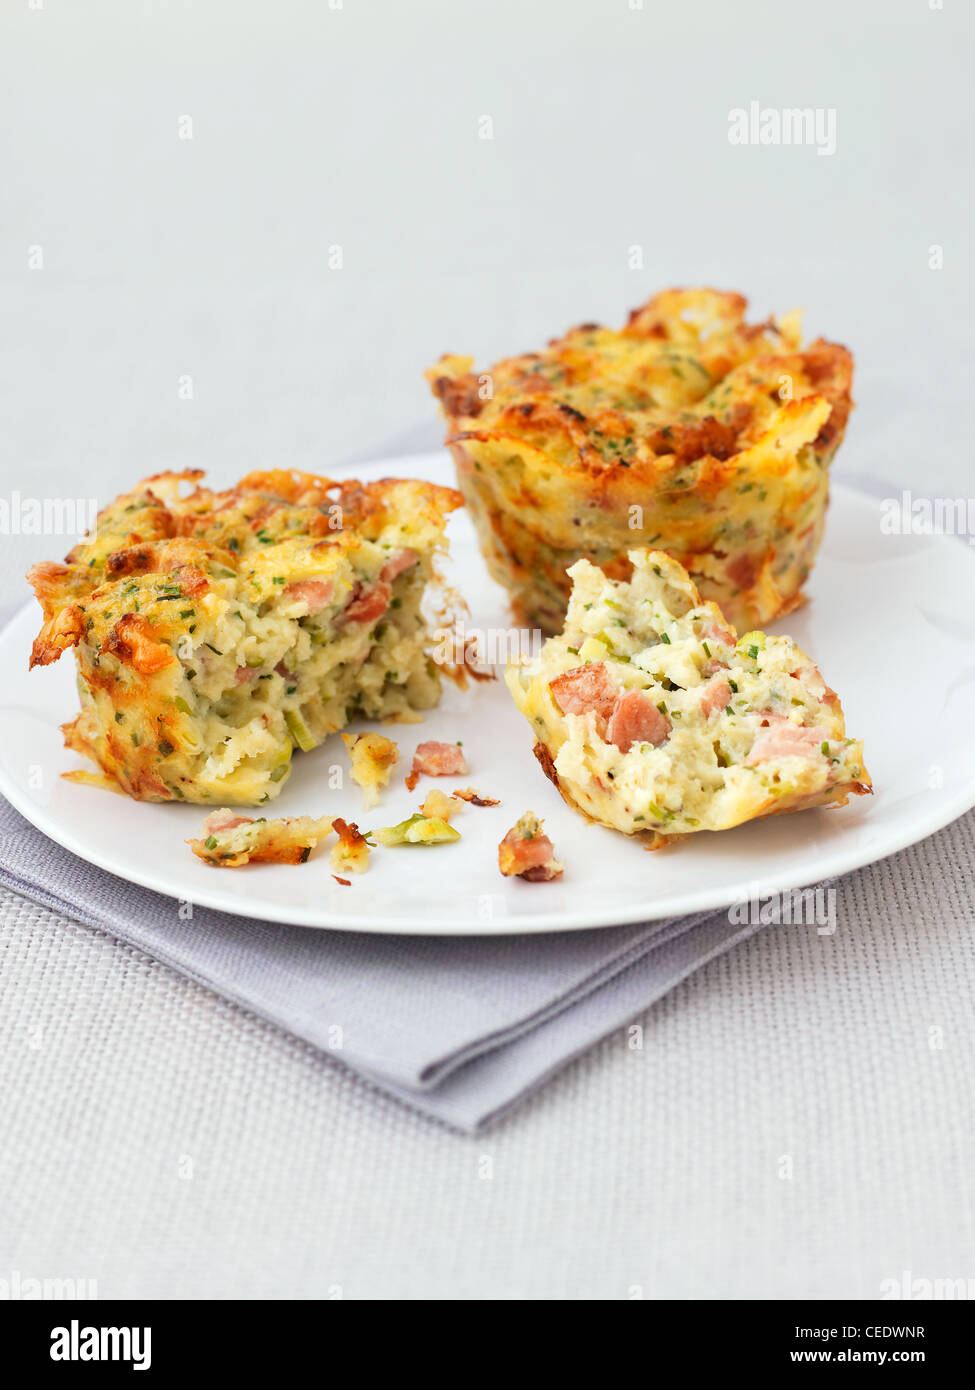 Savoury cheese and bacon muffins Stock Photo